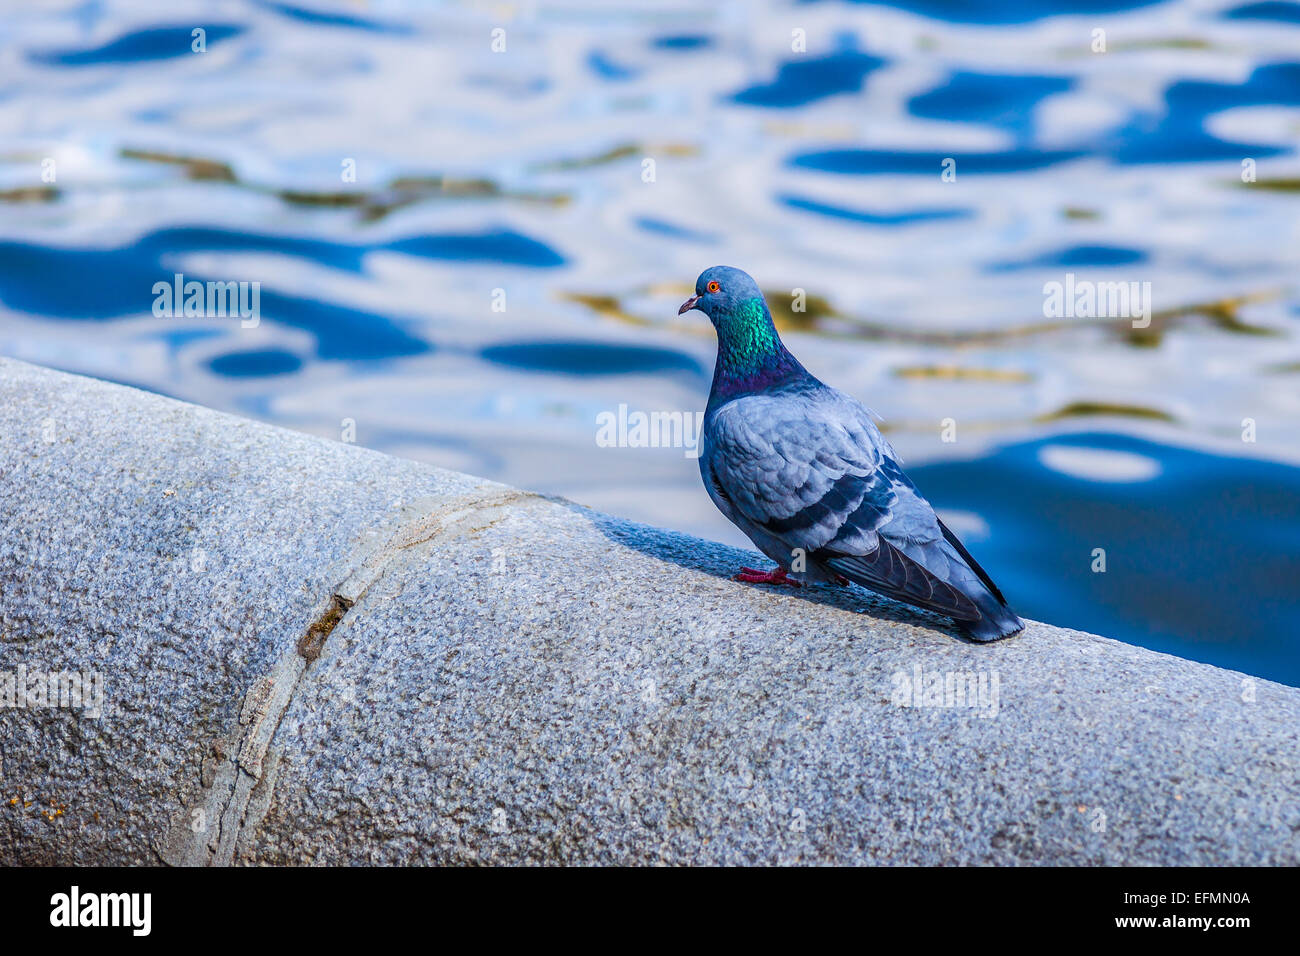 Common city pigeon on an embankment parapet against the background of water Stock Photo